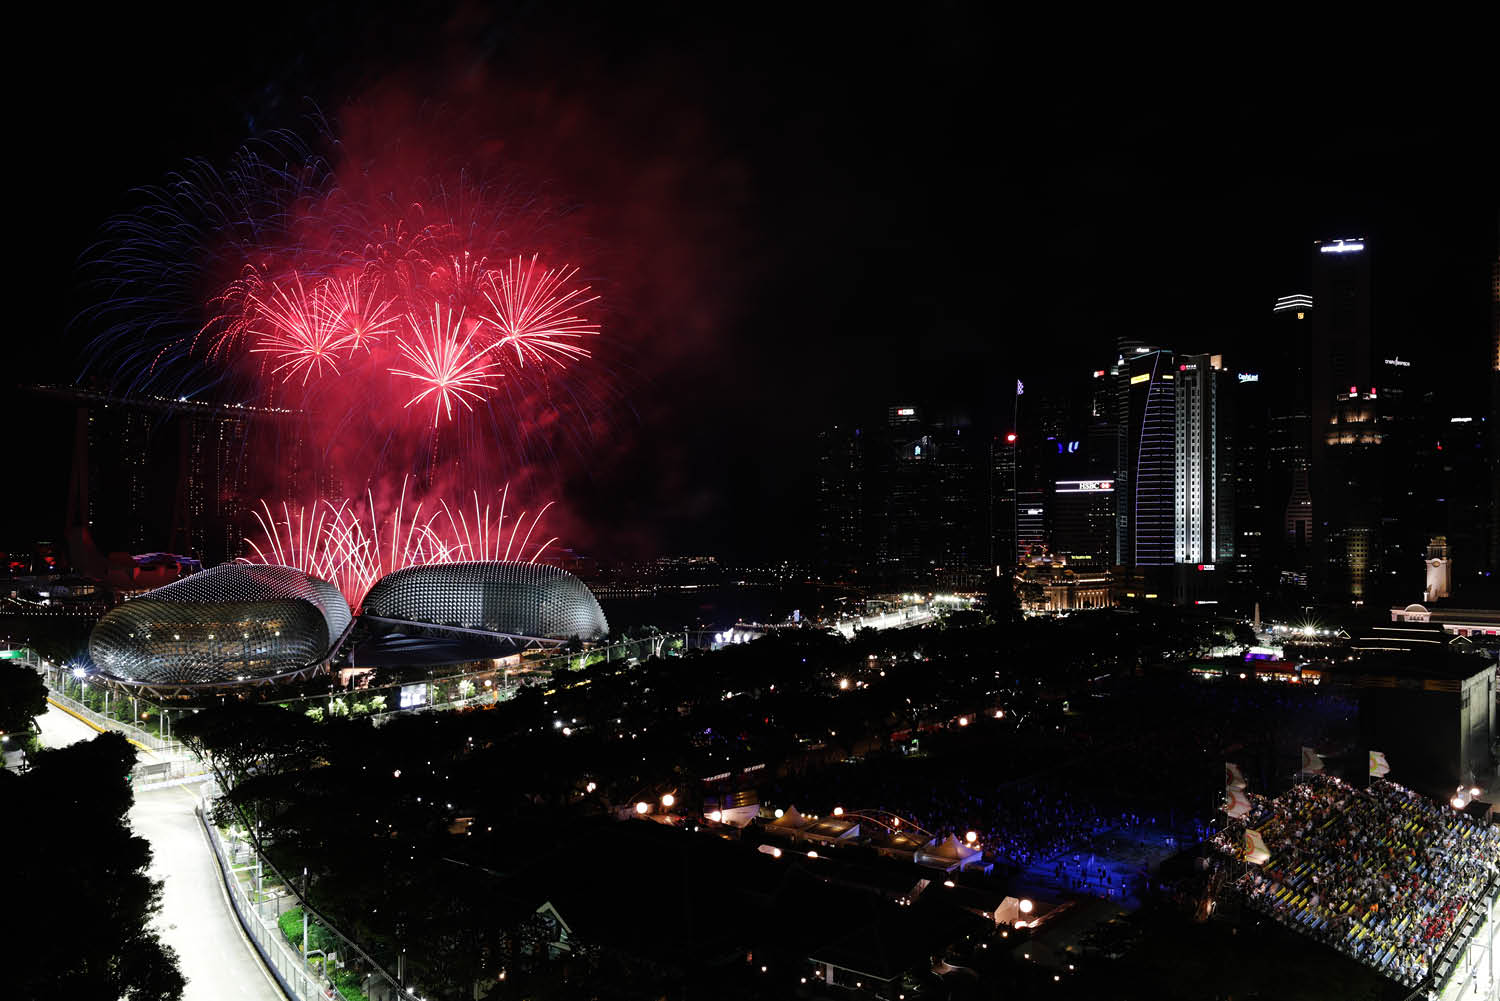 4 reasons to book a trip to the F1 Singapore Grand Prix